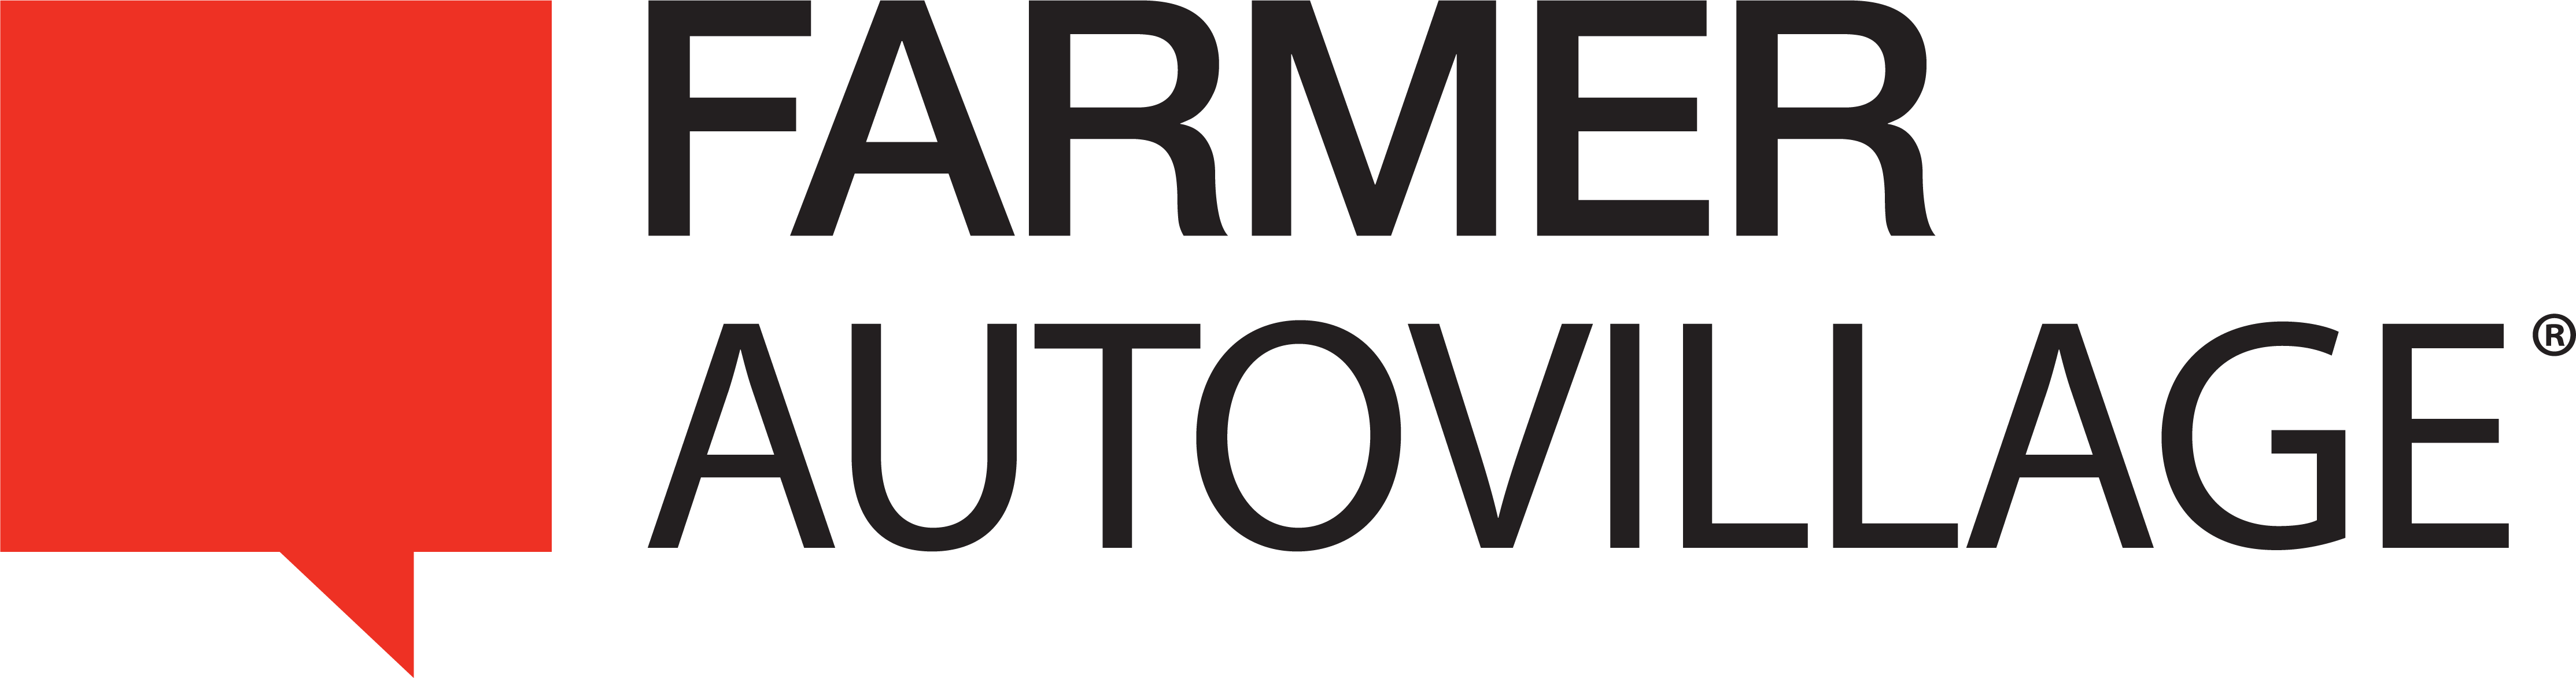 Farmer Autovillage LOGO Black Stacked PNG.png